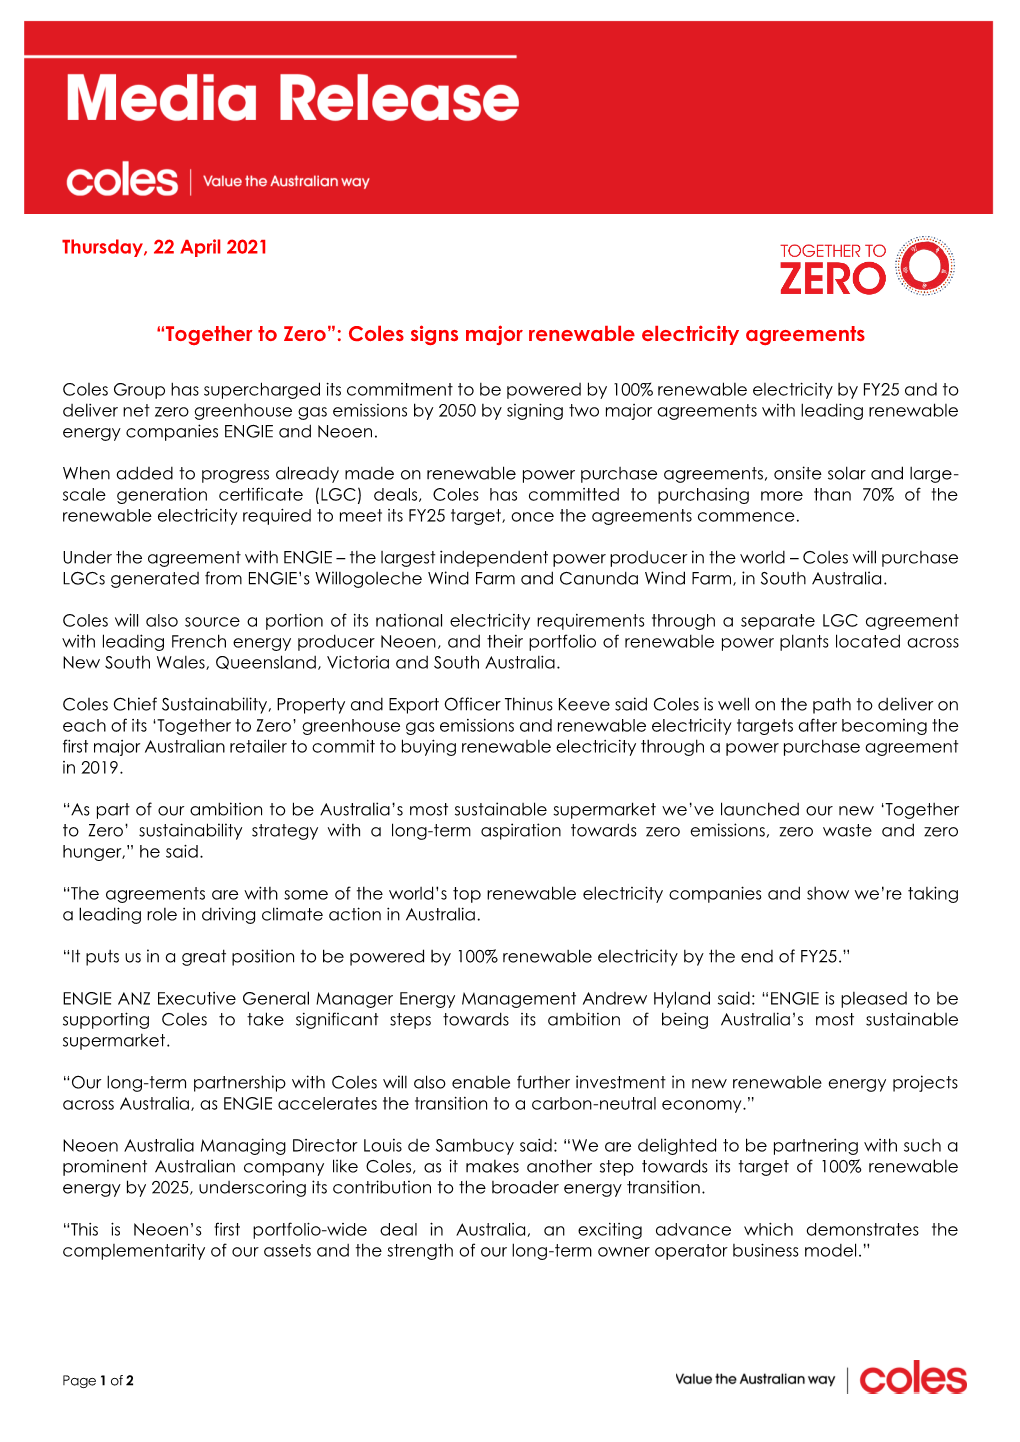 “Together to Zero”: Coles Signs Major Renewable Electricity Agreements